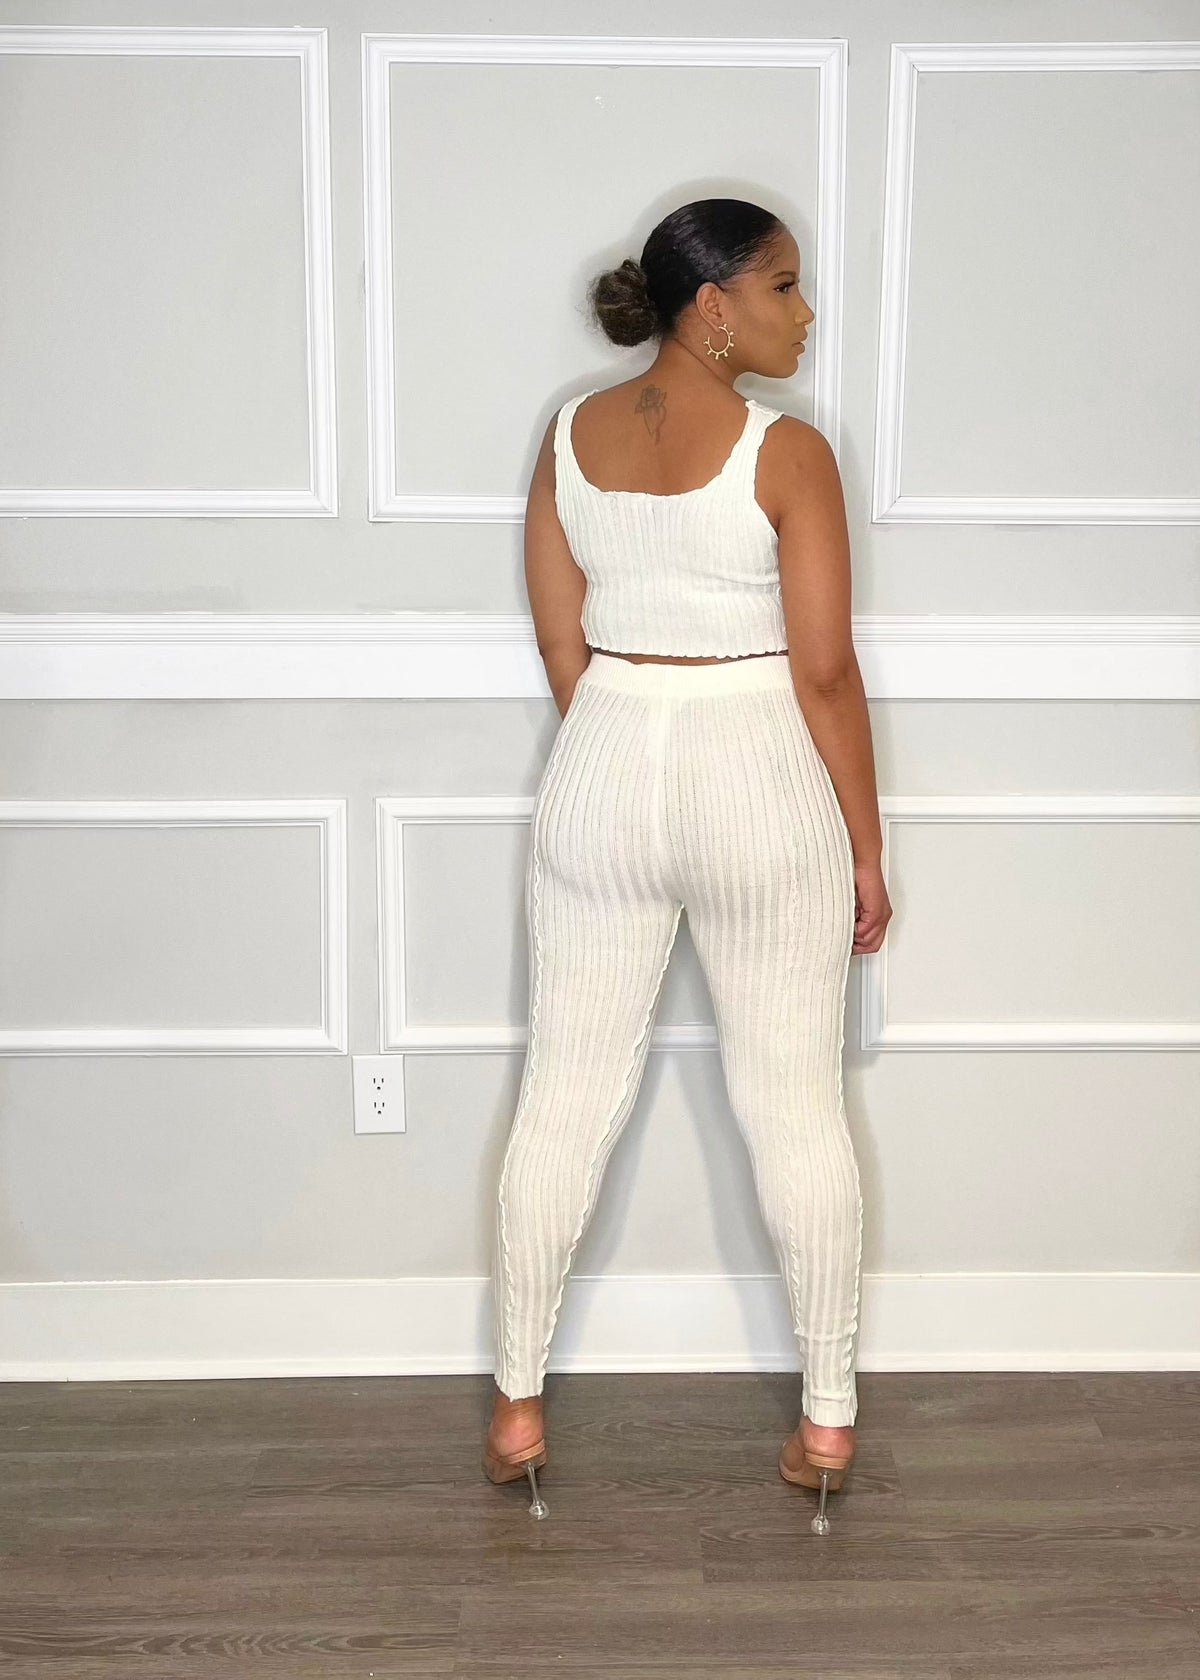 Get trendy with Ivory Sweater Knit Leggings Set - Sets available at ELLE TENAJ. Grab yours for $20.00 today!